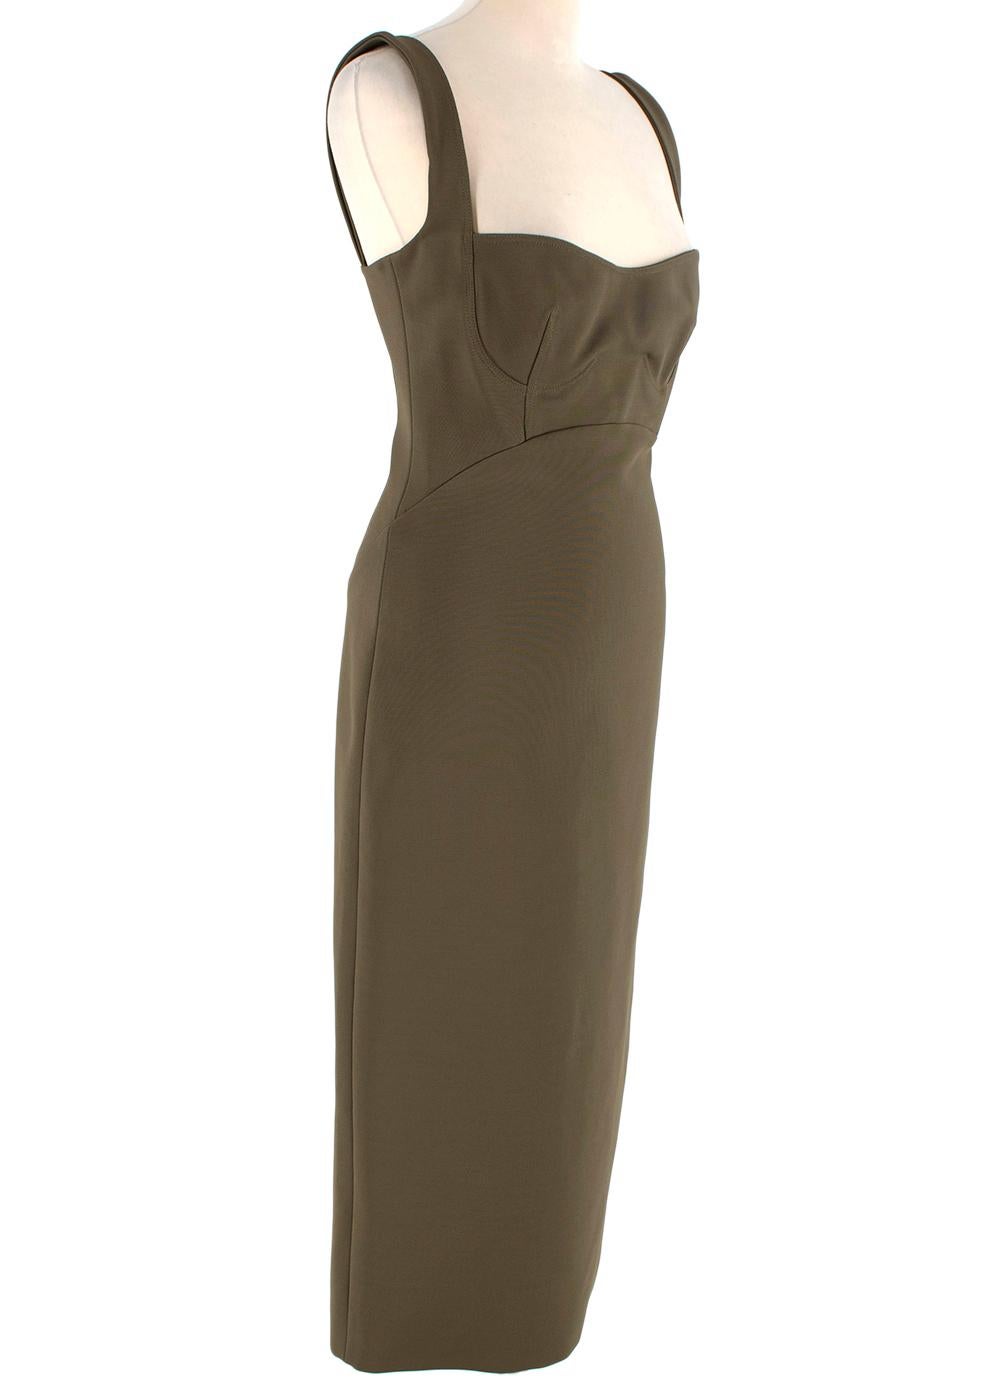 Dion Lee Khaki Sleeveless Sweetheart Midi Dress 

-Sweetheart neckline
- back zip closure
- fitted bust
- Fully lined

Measurements:
38cm shoulder to shoulder
38cm chest
37cm waist 
42cm hip
3cm sleeve length 
99cm length 

All measurements are